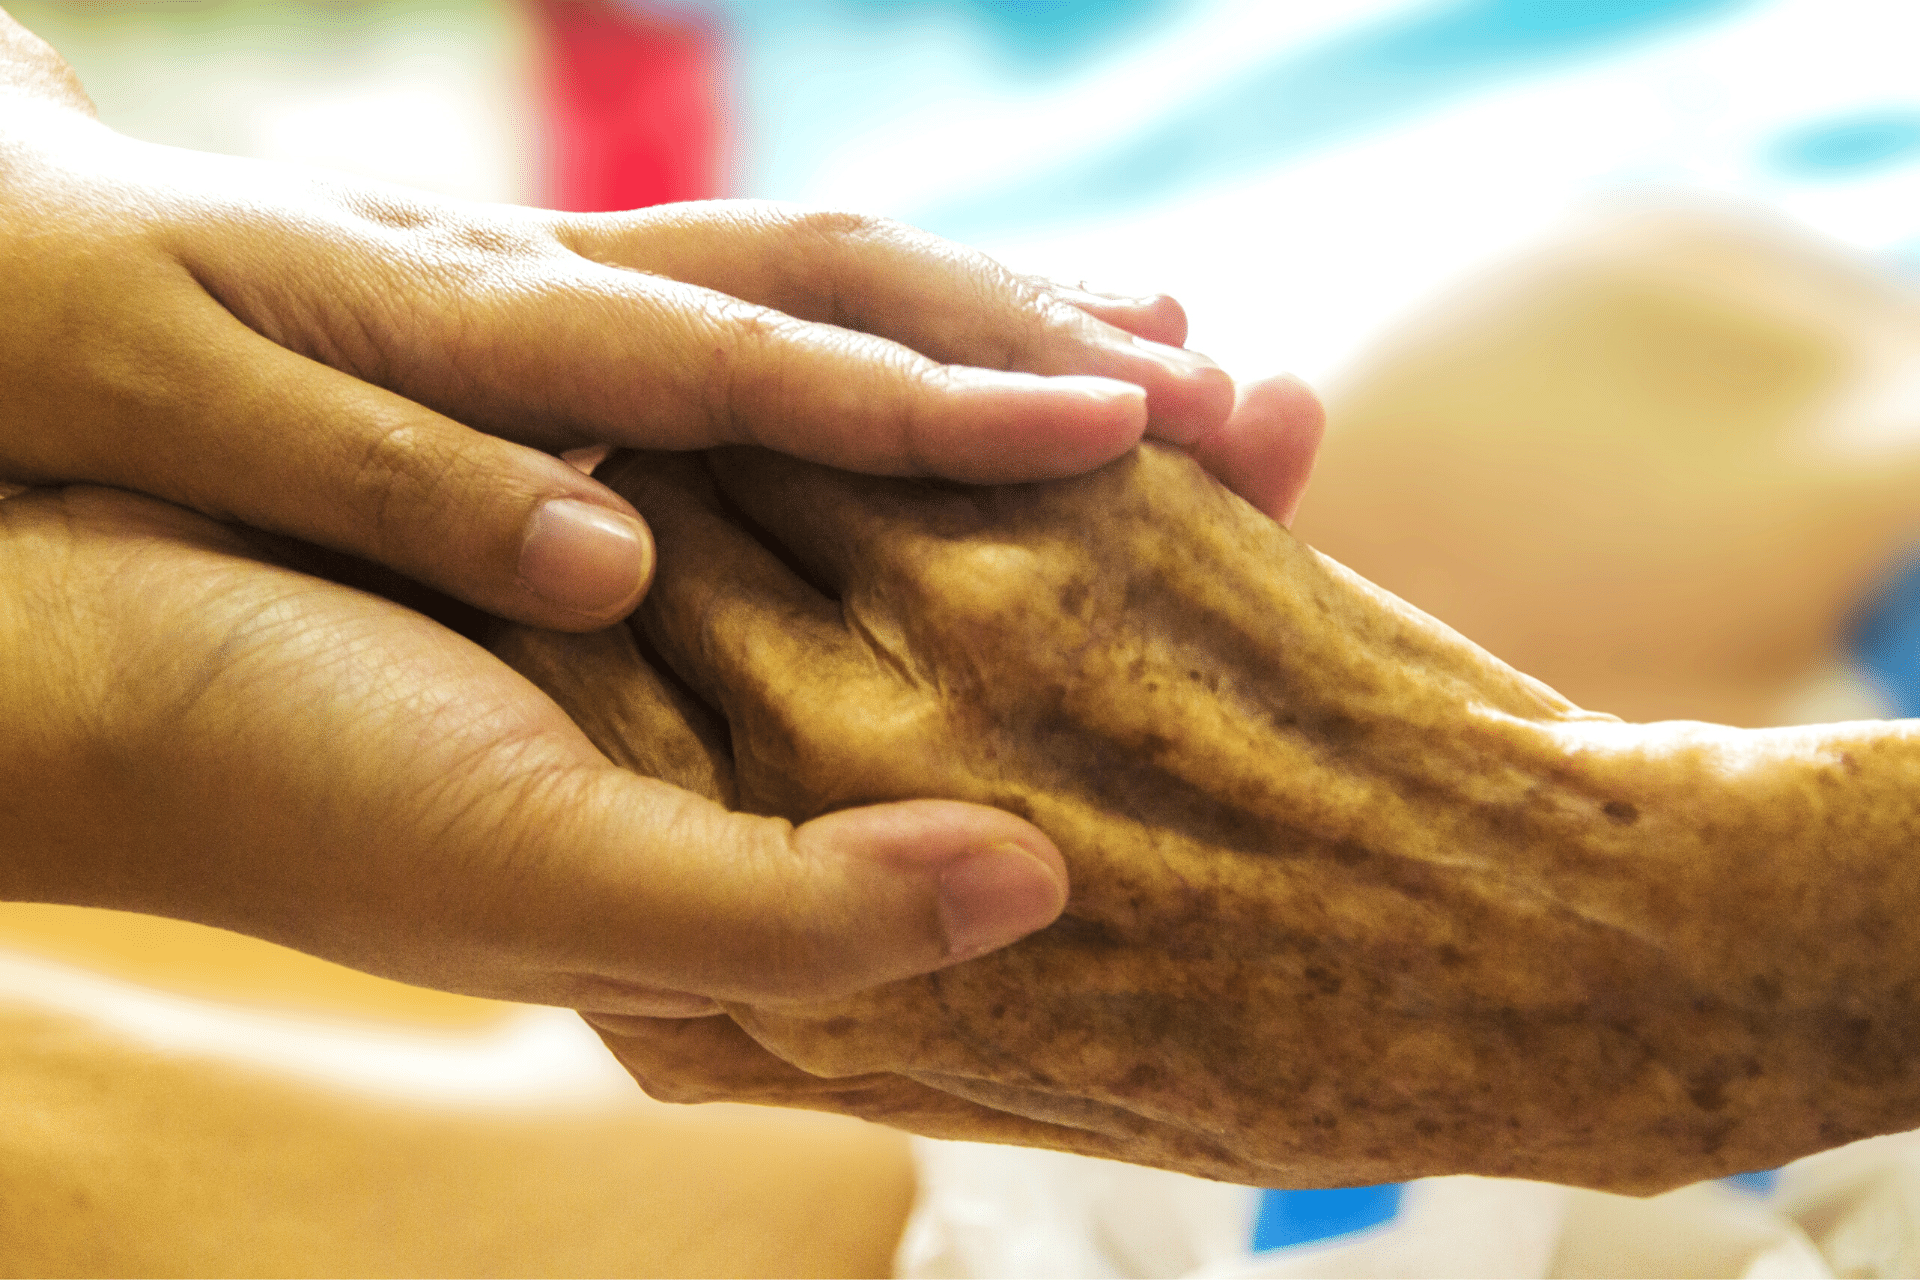 Holding an elder person's hand with care